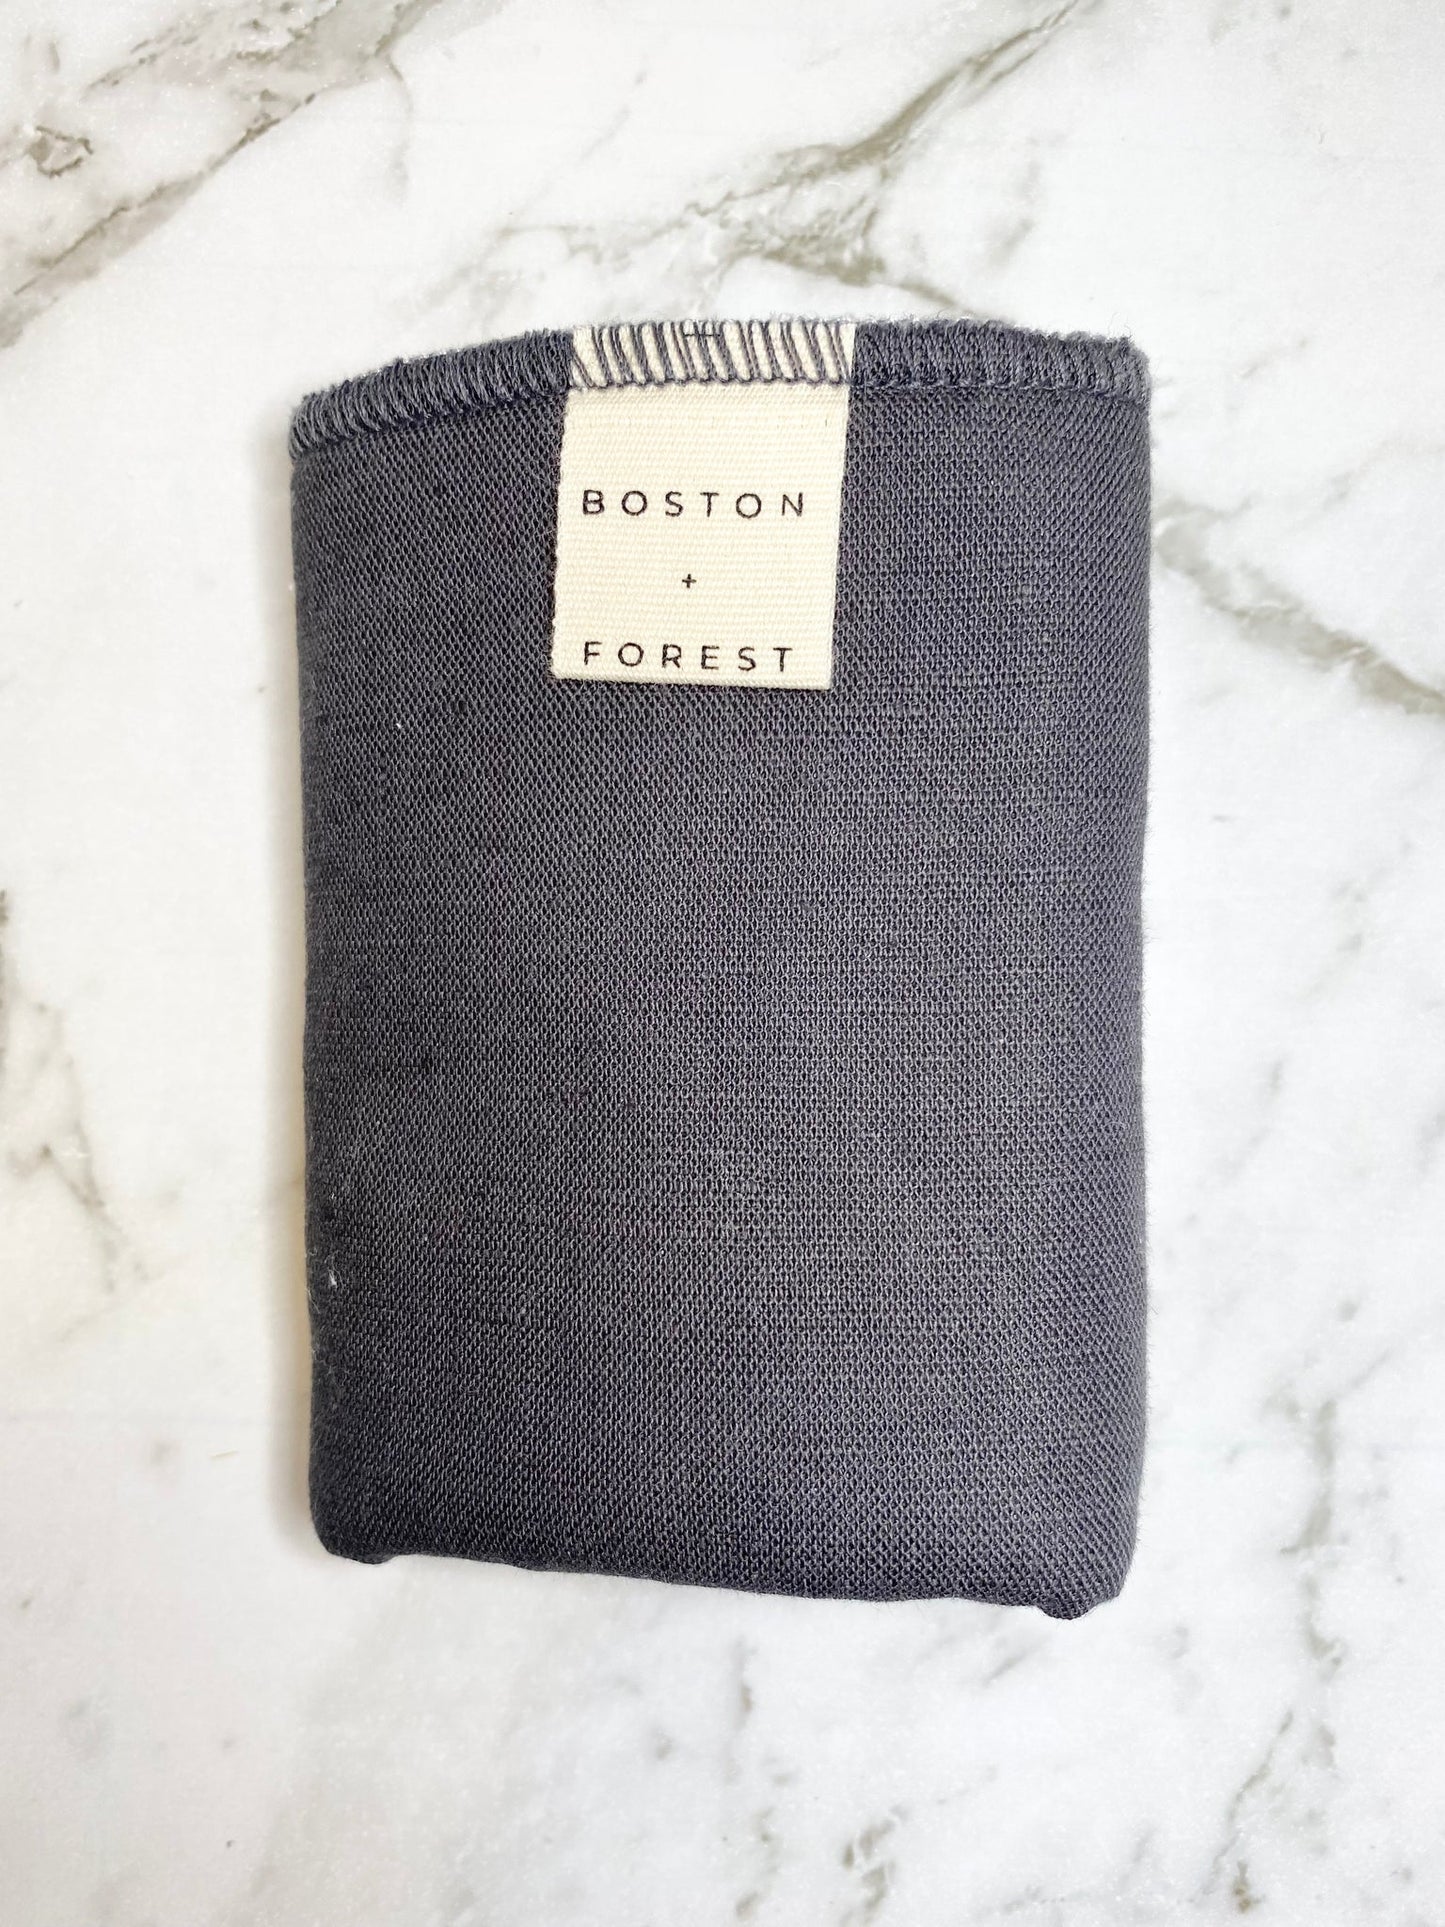 Boston & Forest Grubby Faces Cloth Charcoal